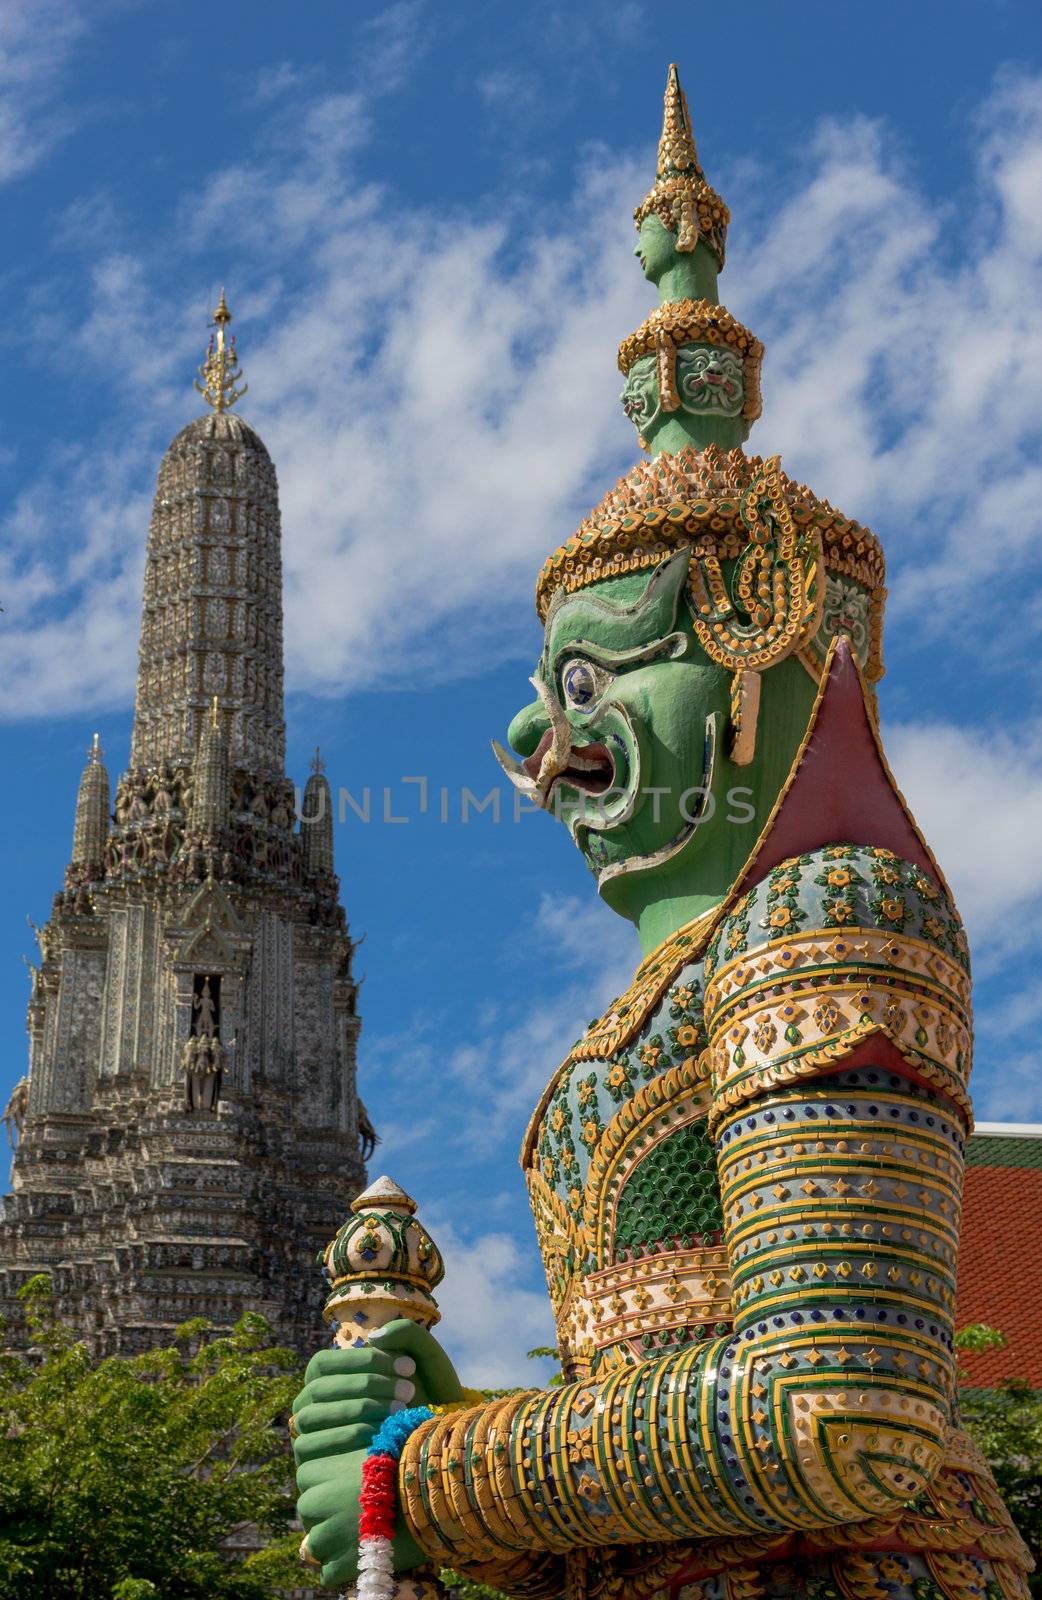 Guardian statue with the Temple of Dawn background, Thailand by punpleng